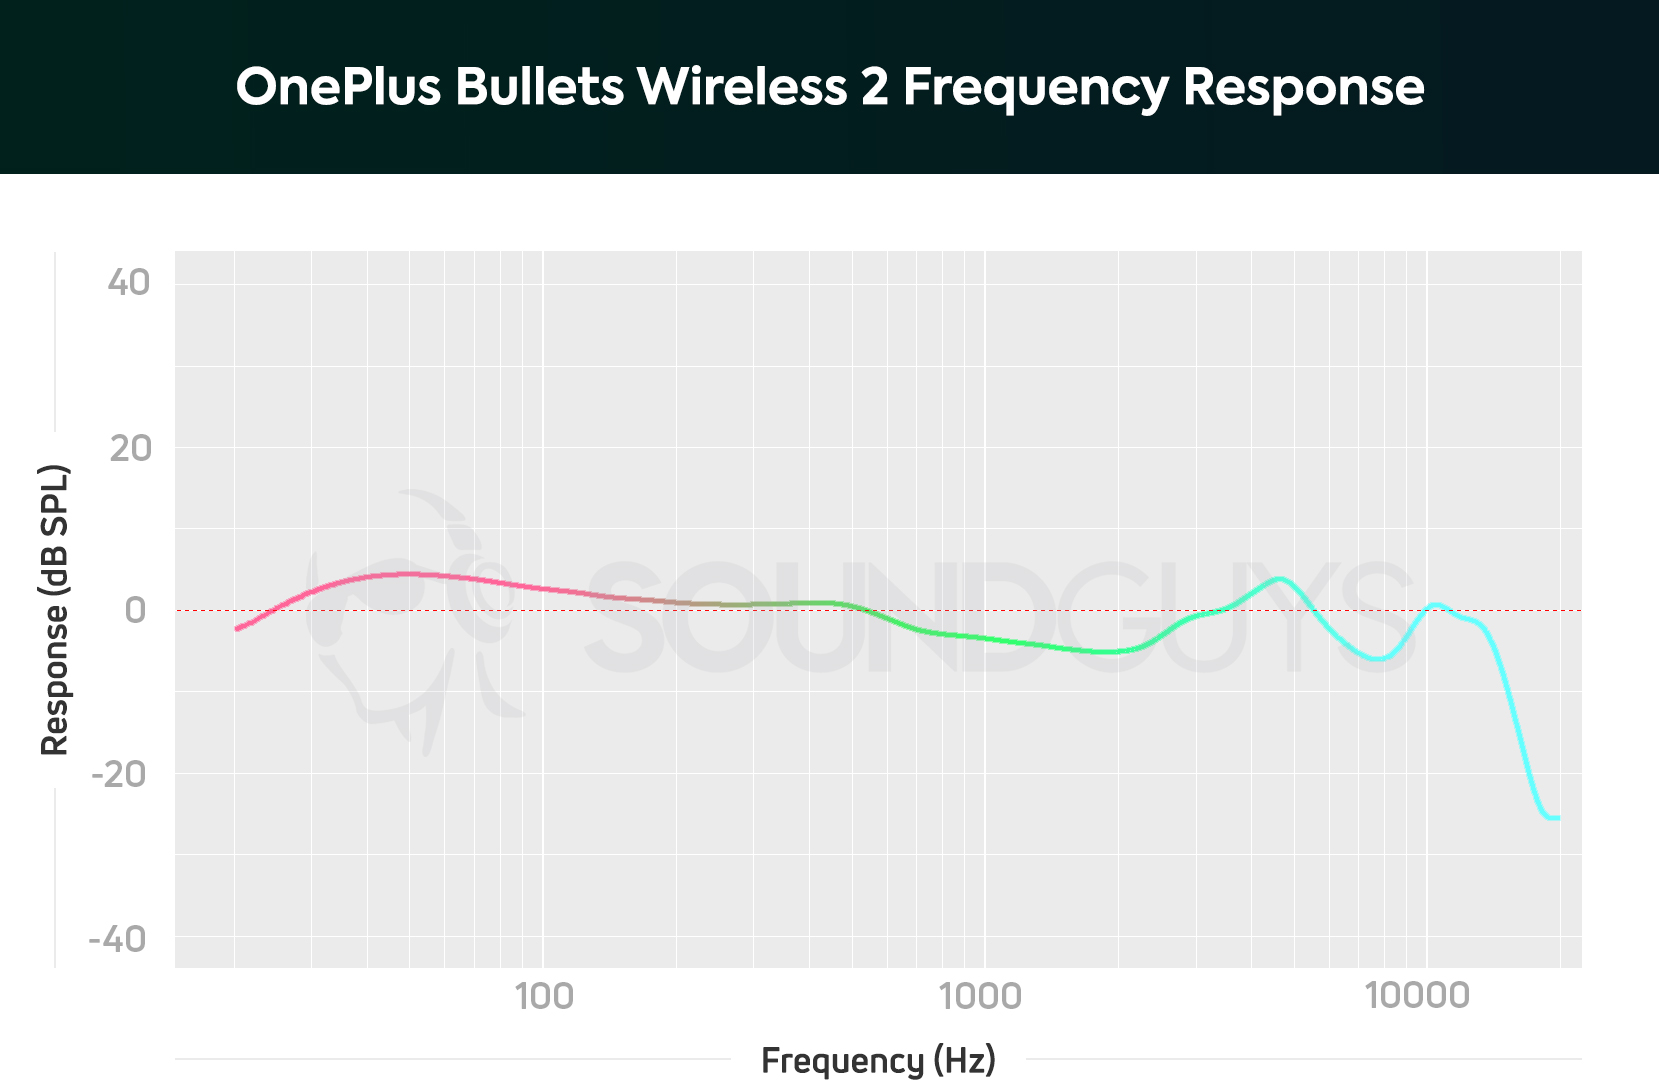 OnePlus Bullets Wireless 2 frequency response chart reveals a neutral-leaning sound signature.